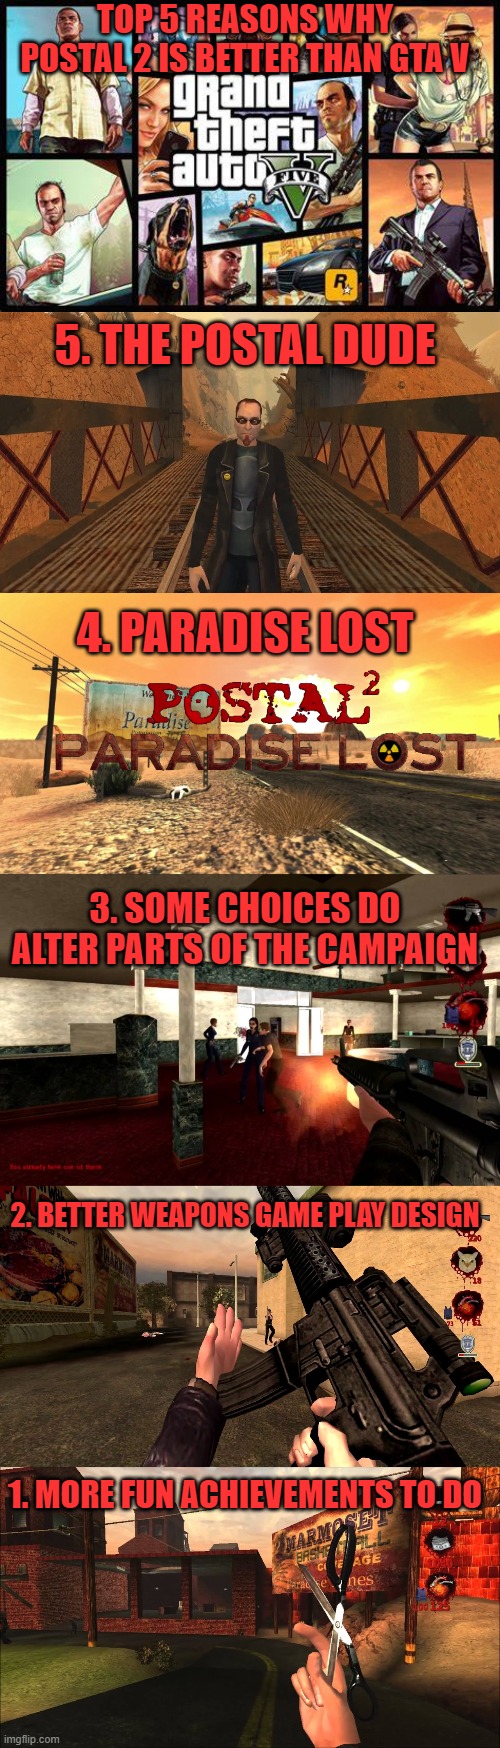 TOP 5 REASONS WHY POSTAL 2 IS BETTER THAN GTA V; 5. THE POSTAL DUDE; 4. PARADISE LOST; 3. SOME CHOICES DO ALTER PARTS OF THE CAMPAIGN; 2. BETTER WEAPONS GAME PLAY DESIGN; 1. MORE FUN ACHIEVEMENTS TO DO | image tagged in postal,gta,top 5 | made w/ Imgflip meme maker